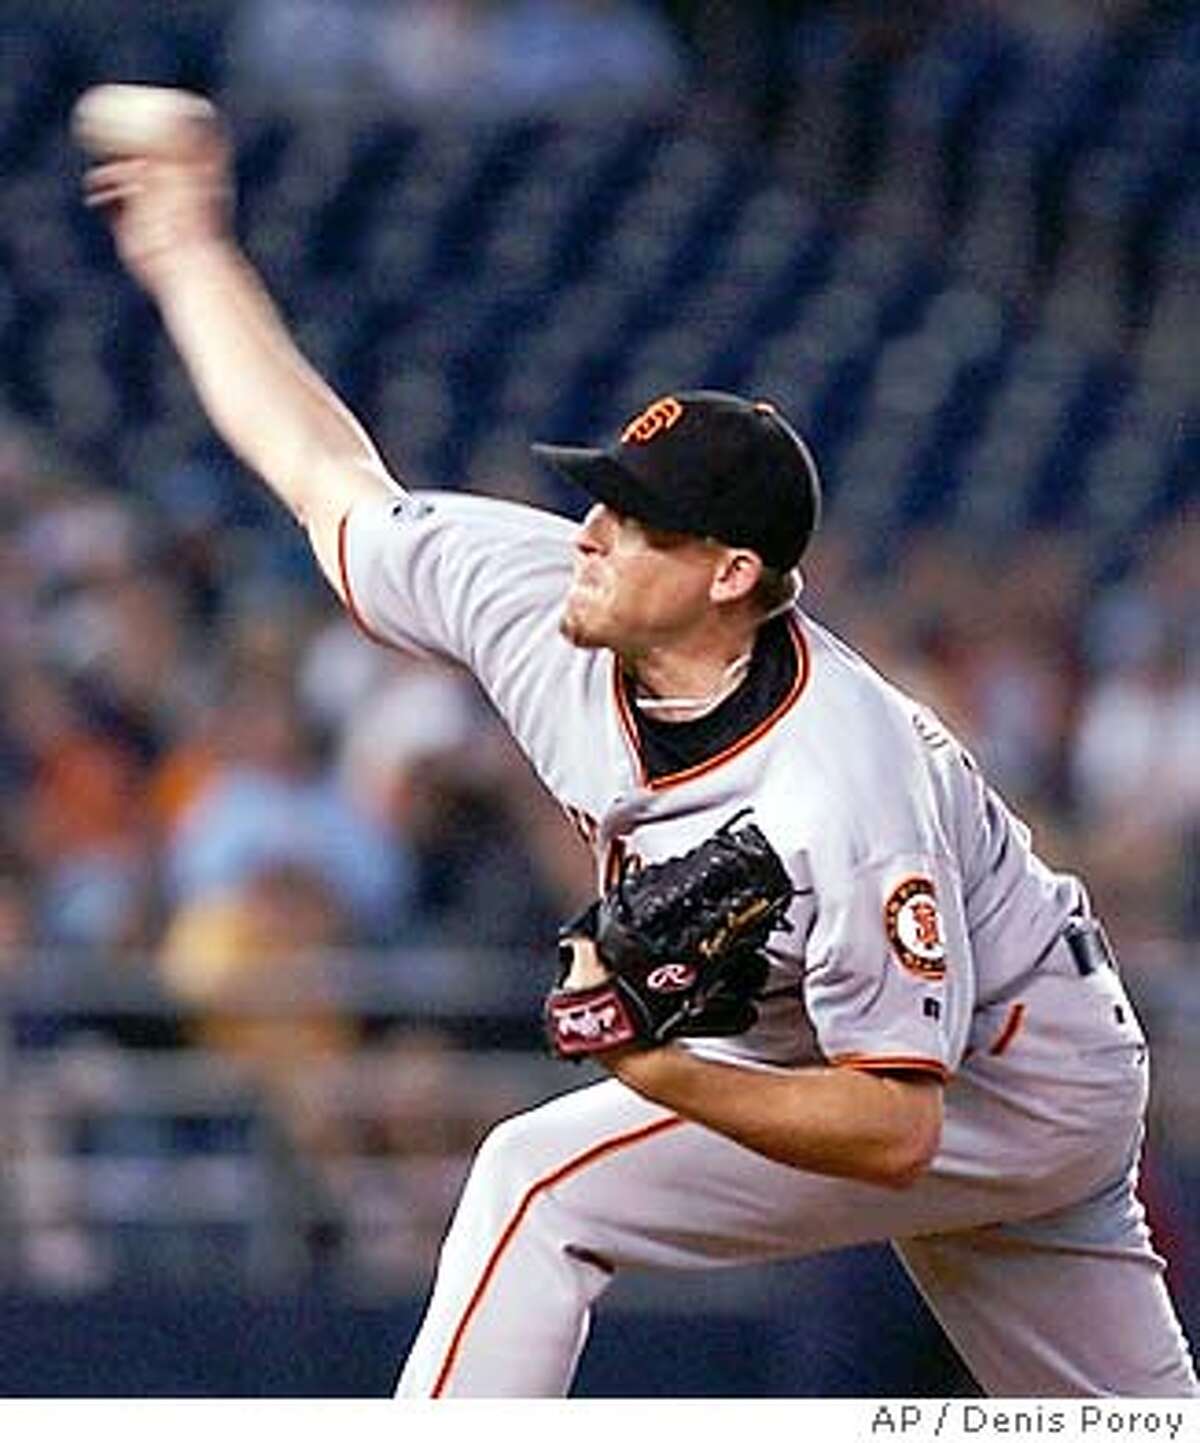 Giants alum J.T. Snow ready to come down the mountain, do more in baseball